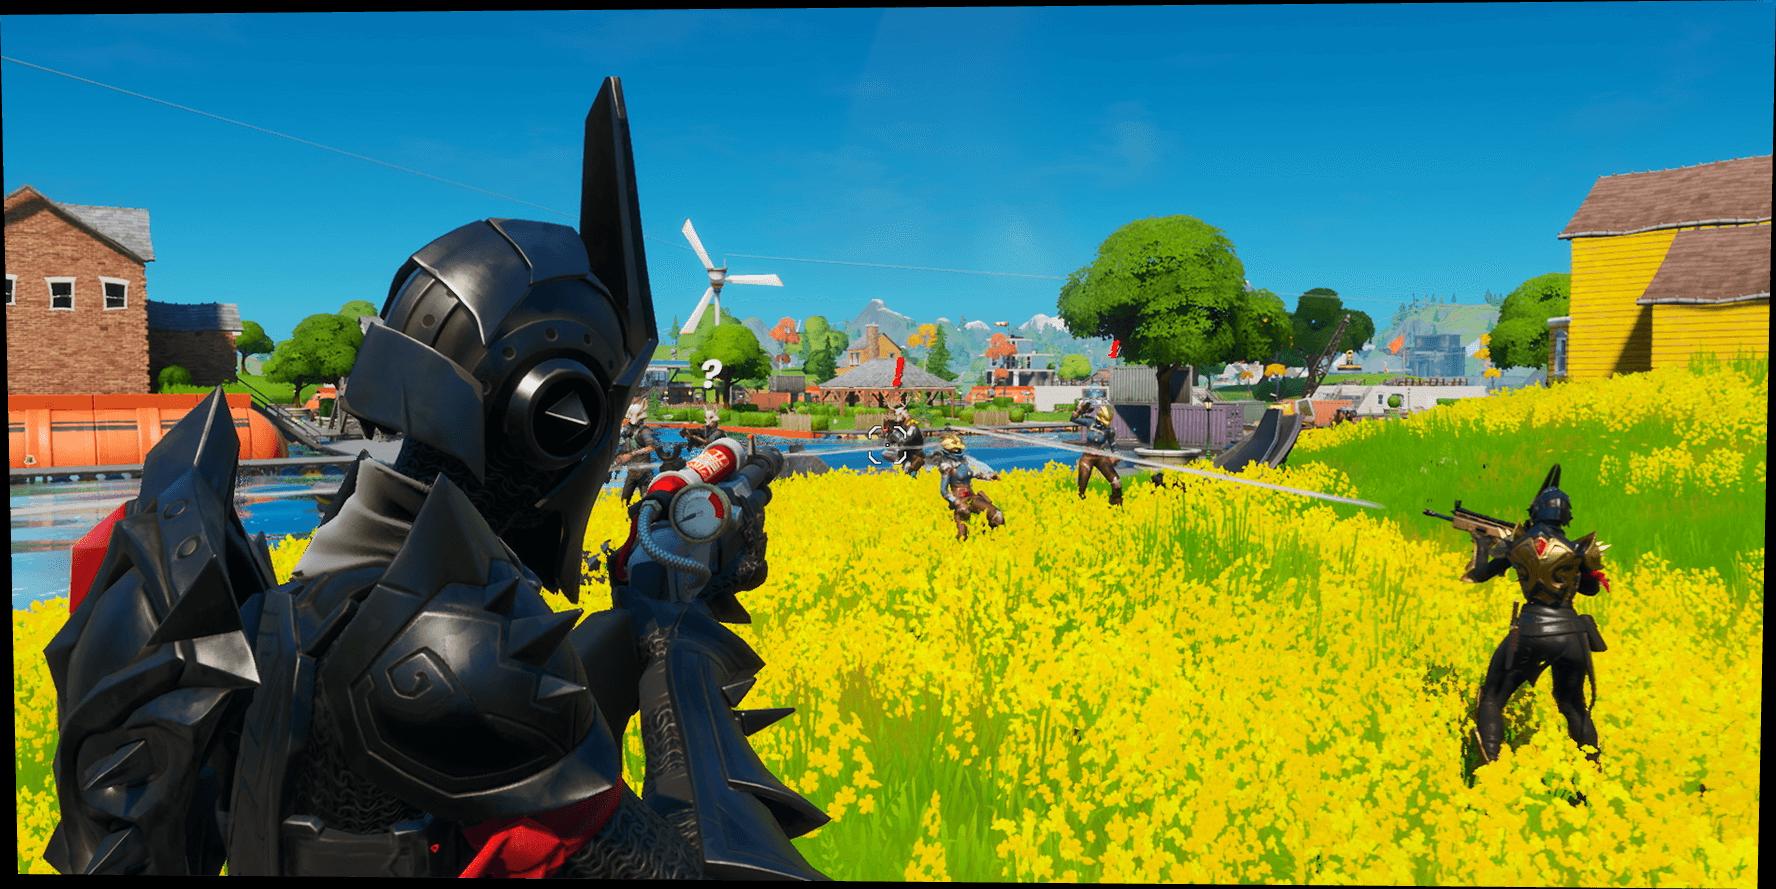 Fortnite Challenges How To Complete The Season 3 Chapter 2 Week 4 Challenges From Aquaman To Dirty Docks Time Trial Sunderland Echo